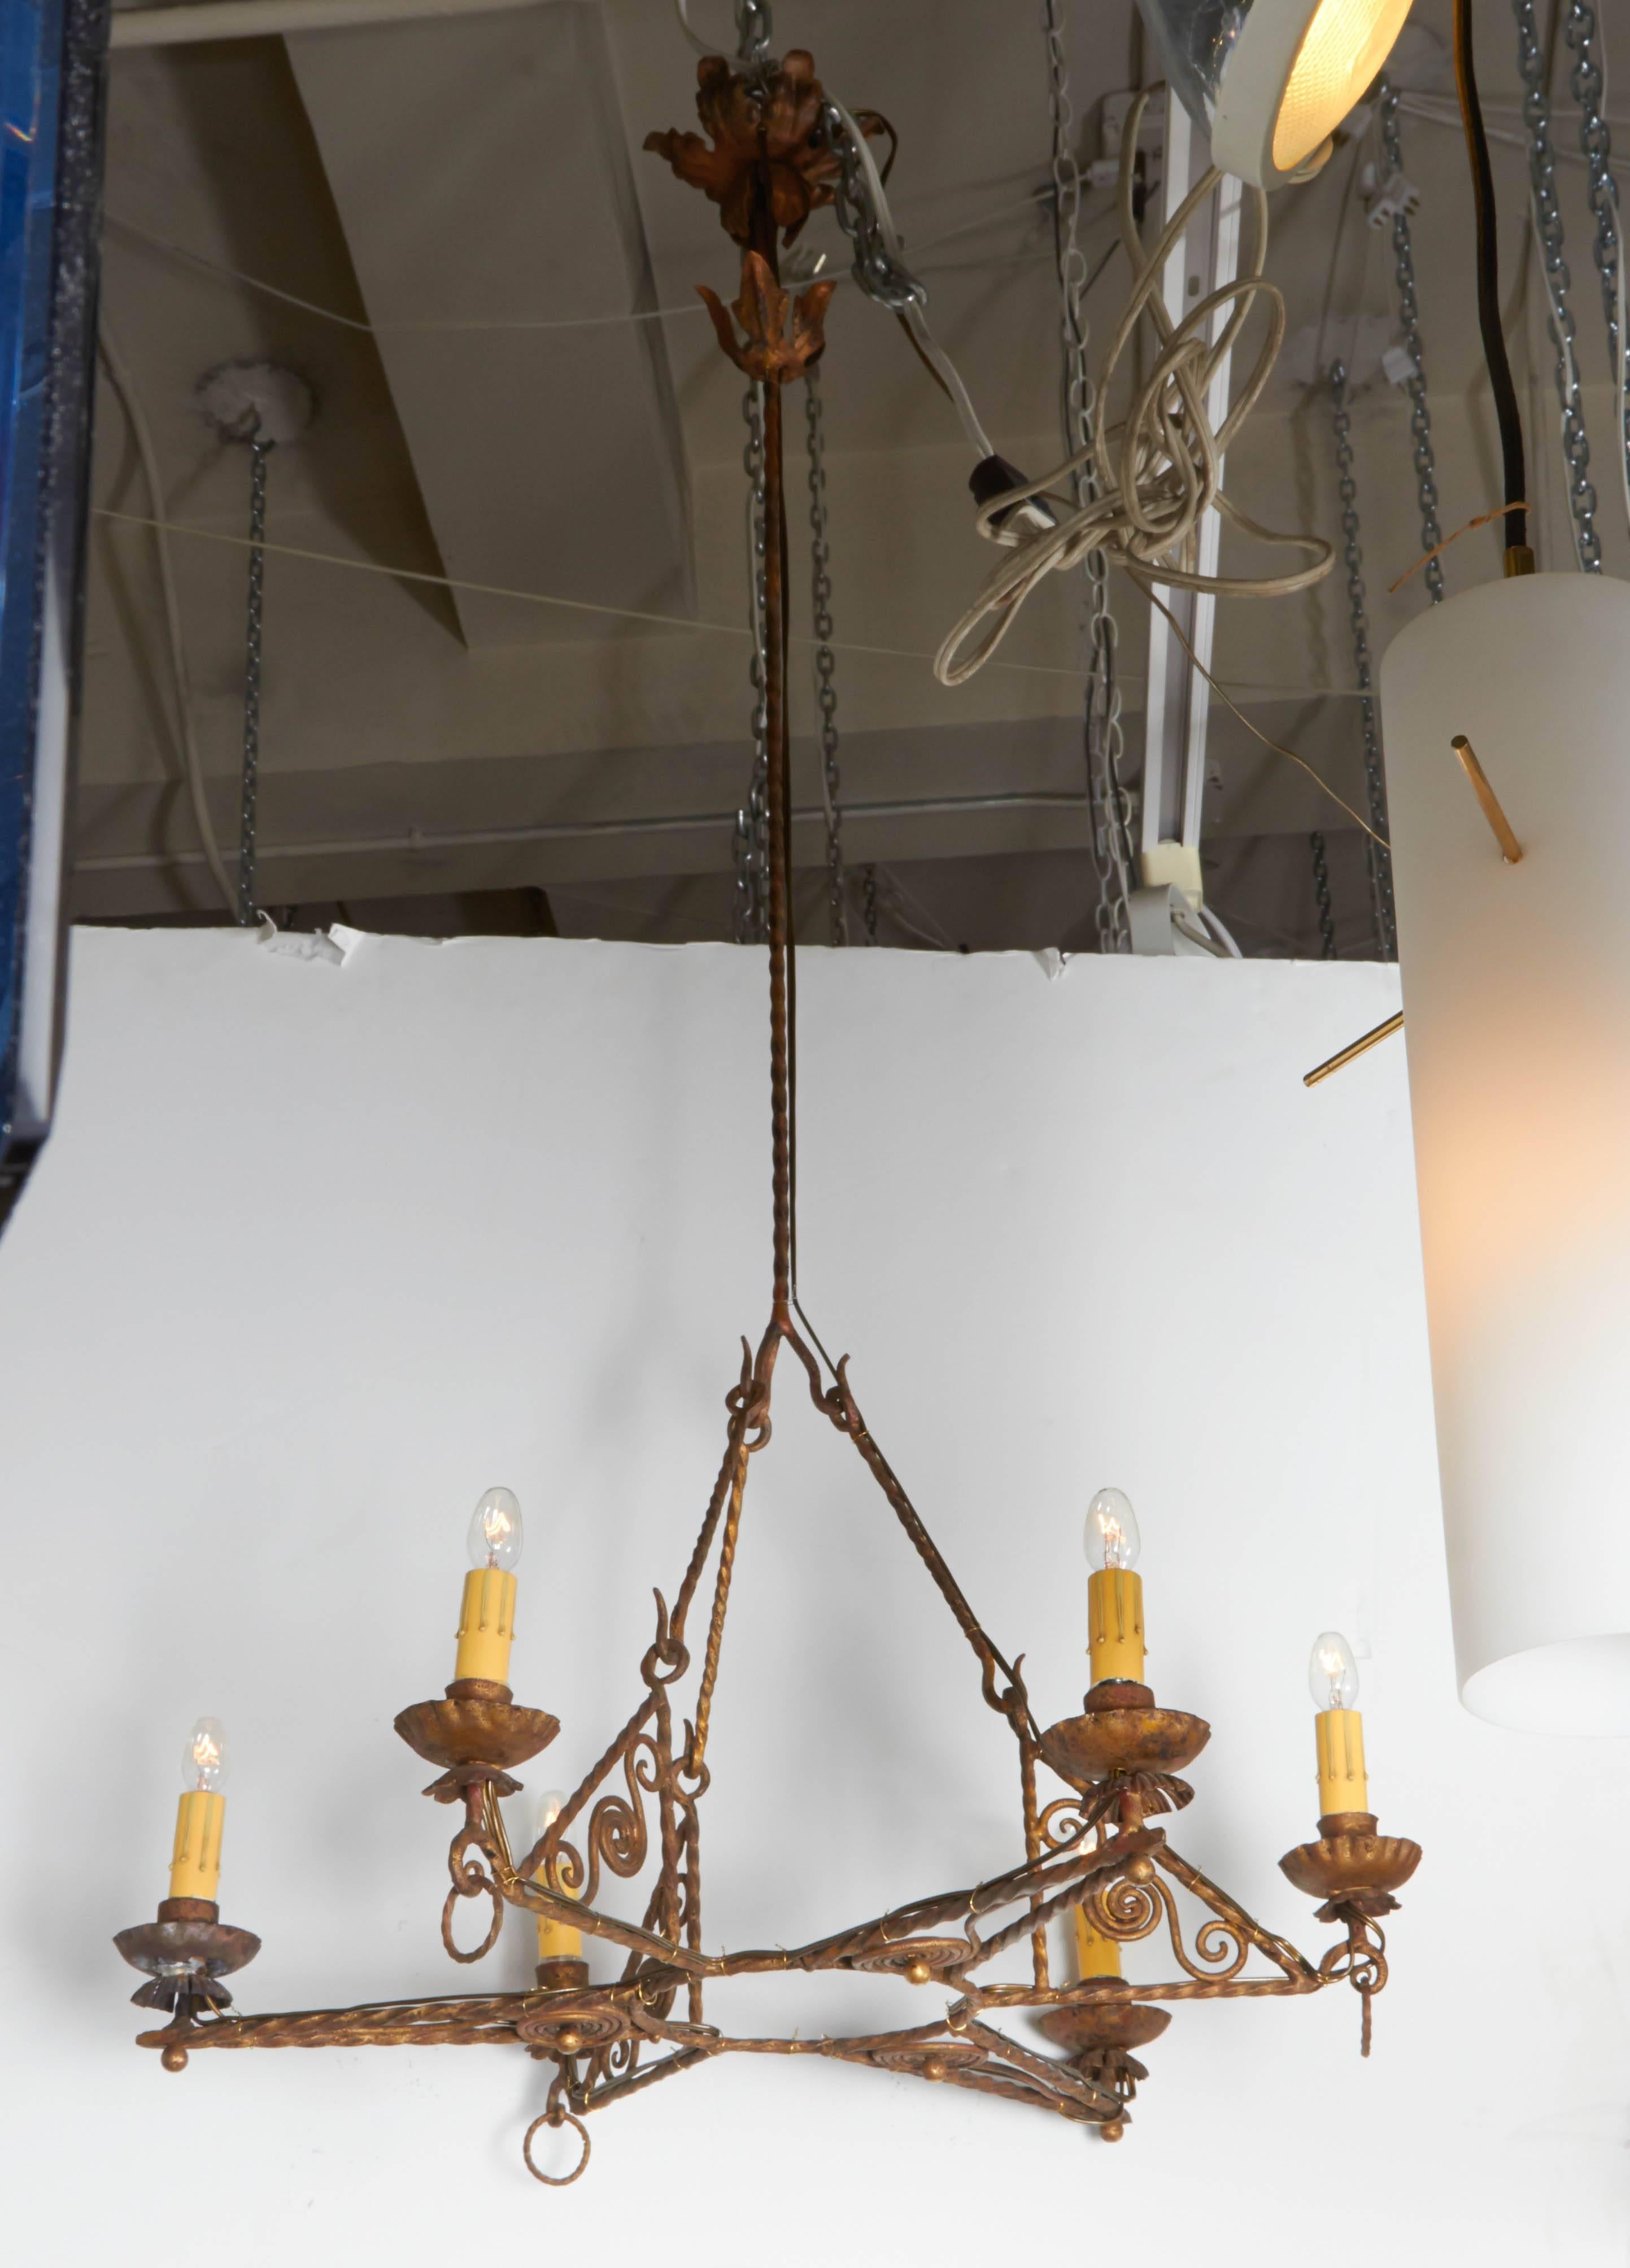 A very nice Italian Art Deco chandelier, circa 1920. Entirely hand-wrought and gilt iron with spiral scroll work accents. Six arms support each candelabra socket with cover in a star design. Externally re-wired in the same manner as found in an